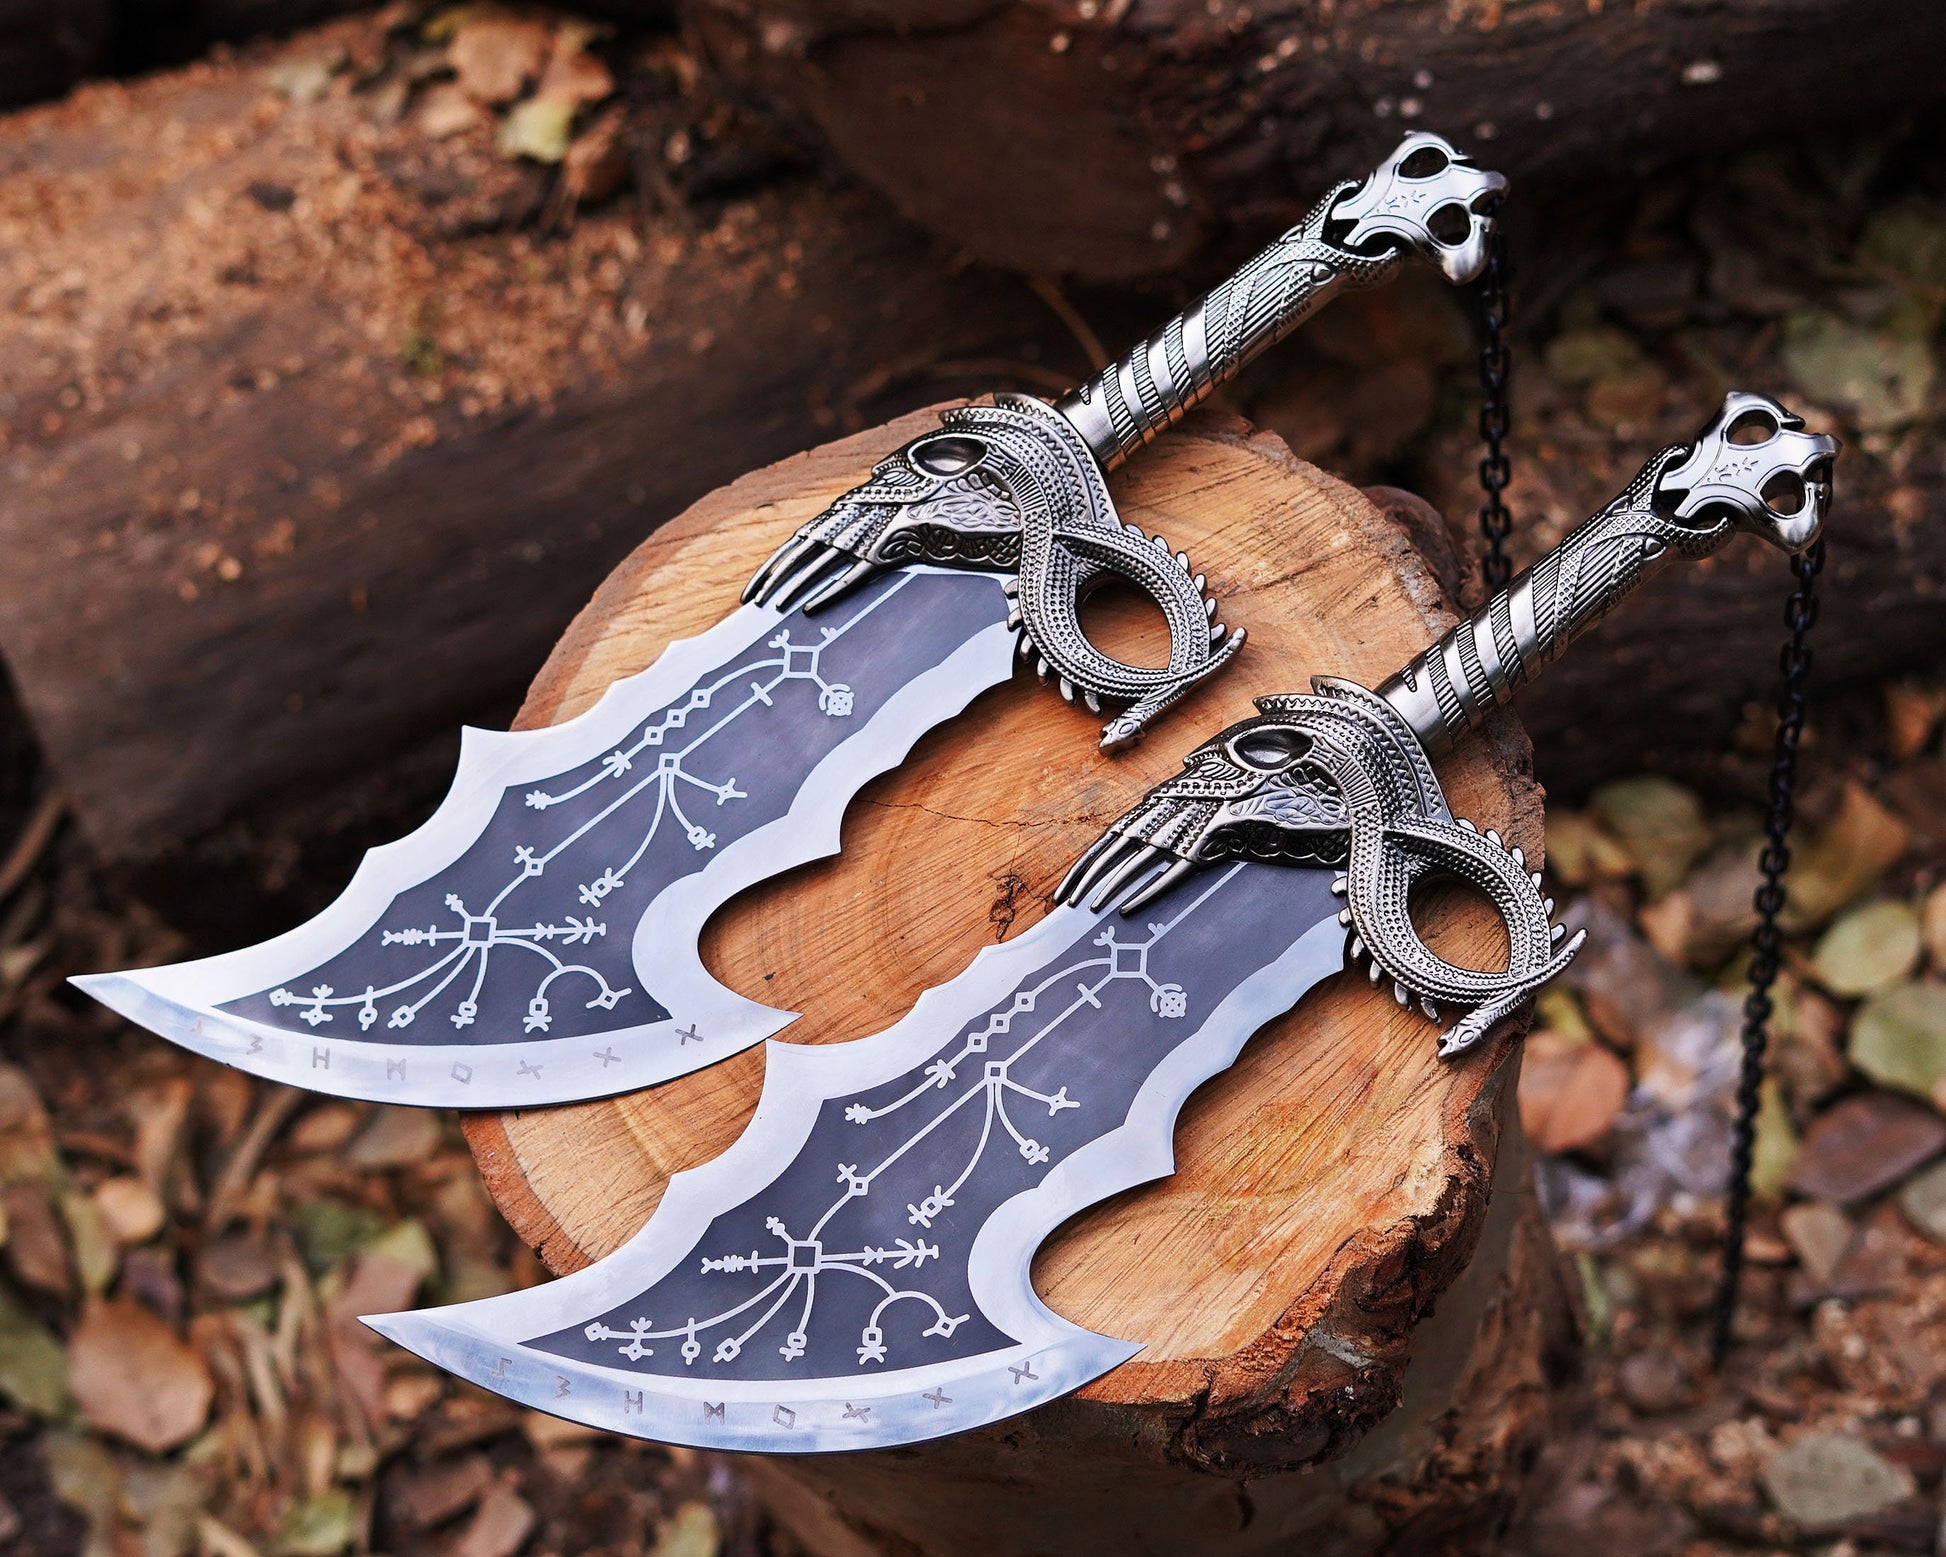 God of War Blades of Chaos Silver Metal, God of War, God of War Blades of Chaos Twin Blades - Premium best Happy Valentine Day gift from SCORPION KART - Just $250! Shop now at SCORPION KART